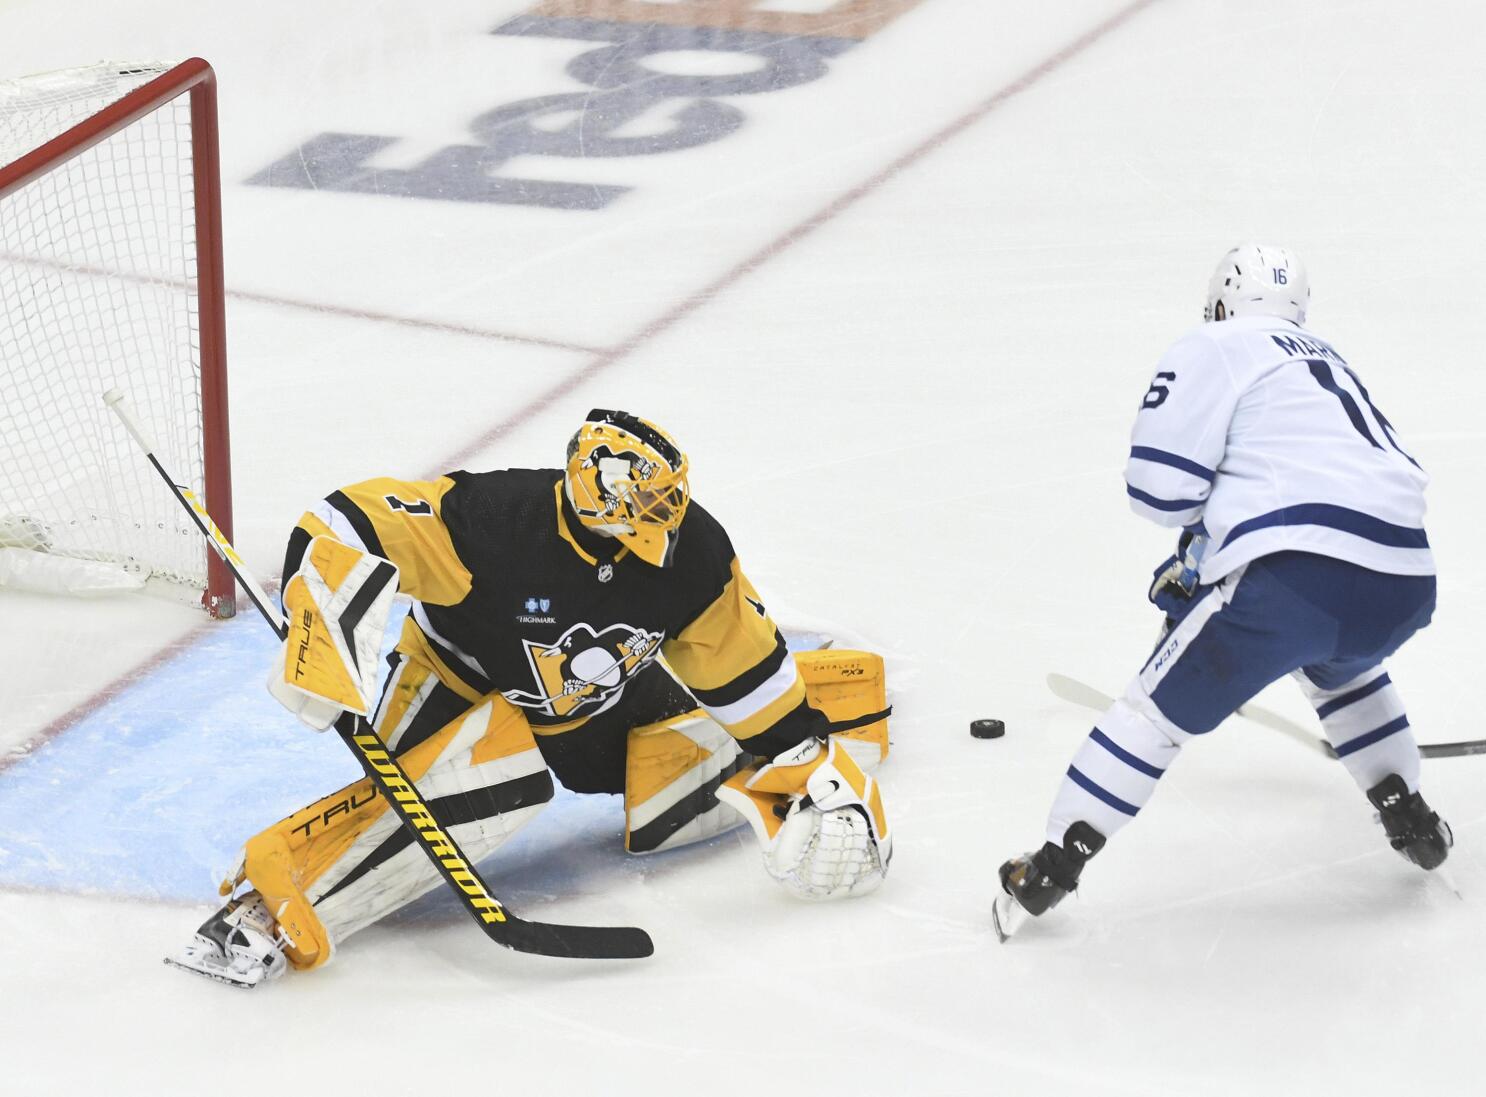 Toronto Maple Leafs: Outplayed By Evgeny Malkin's Line